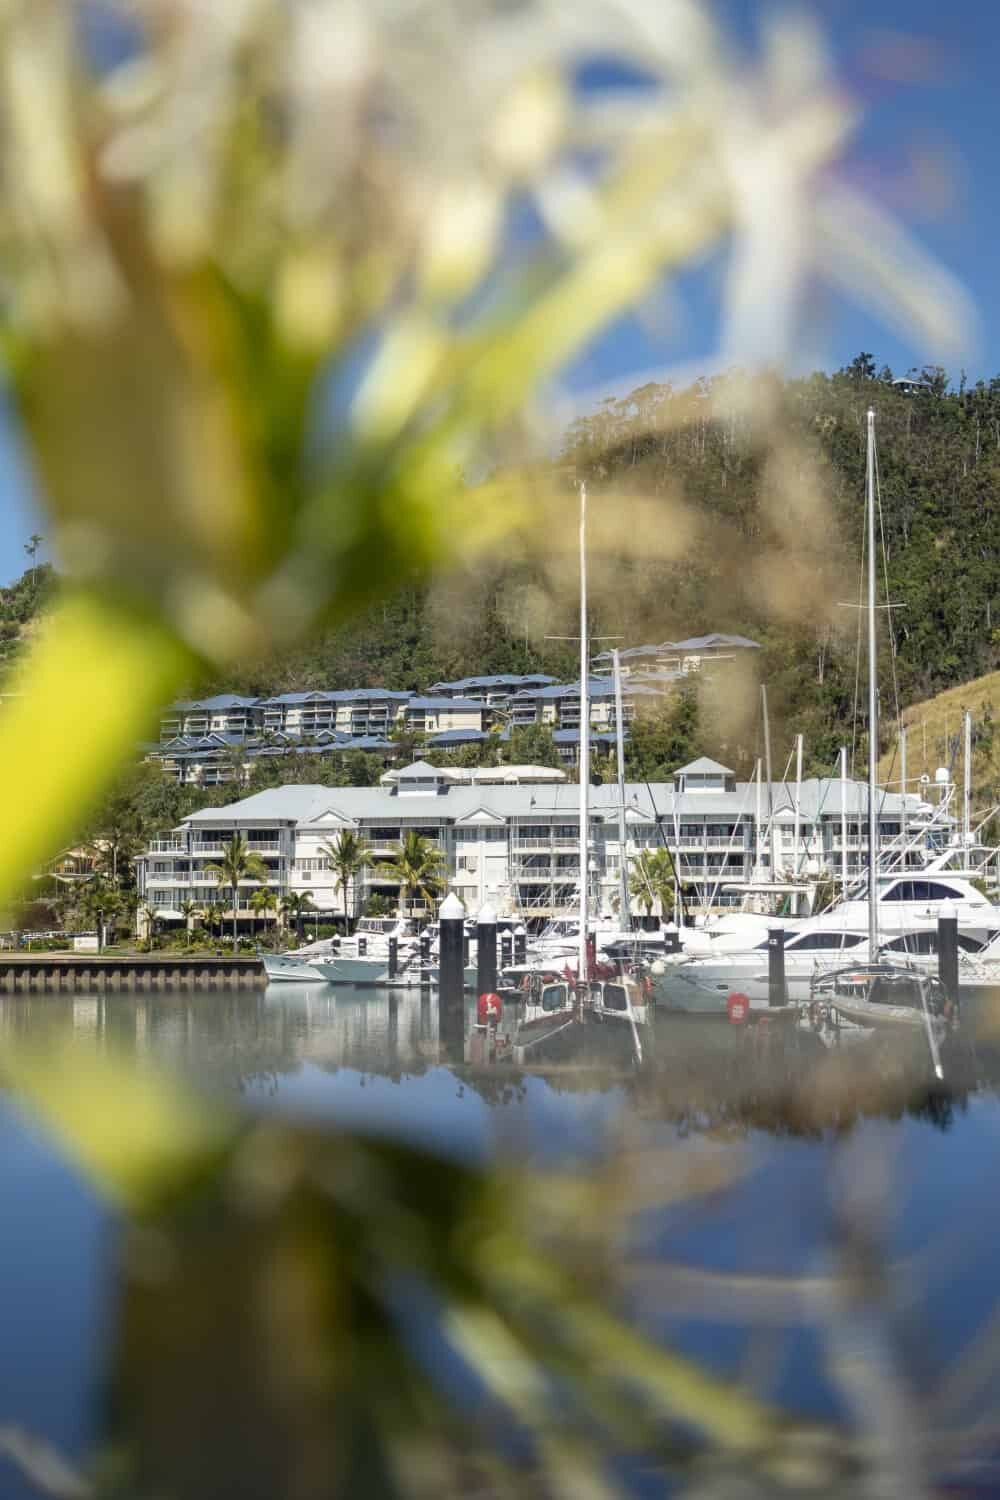 Where to stay in Airlie Beach? At the Mantra Boathouse Apartments, Airlie Beach, Queensland